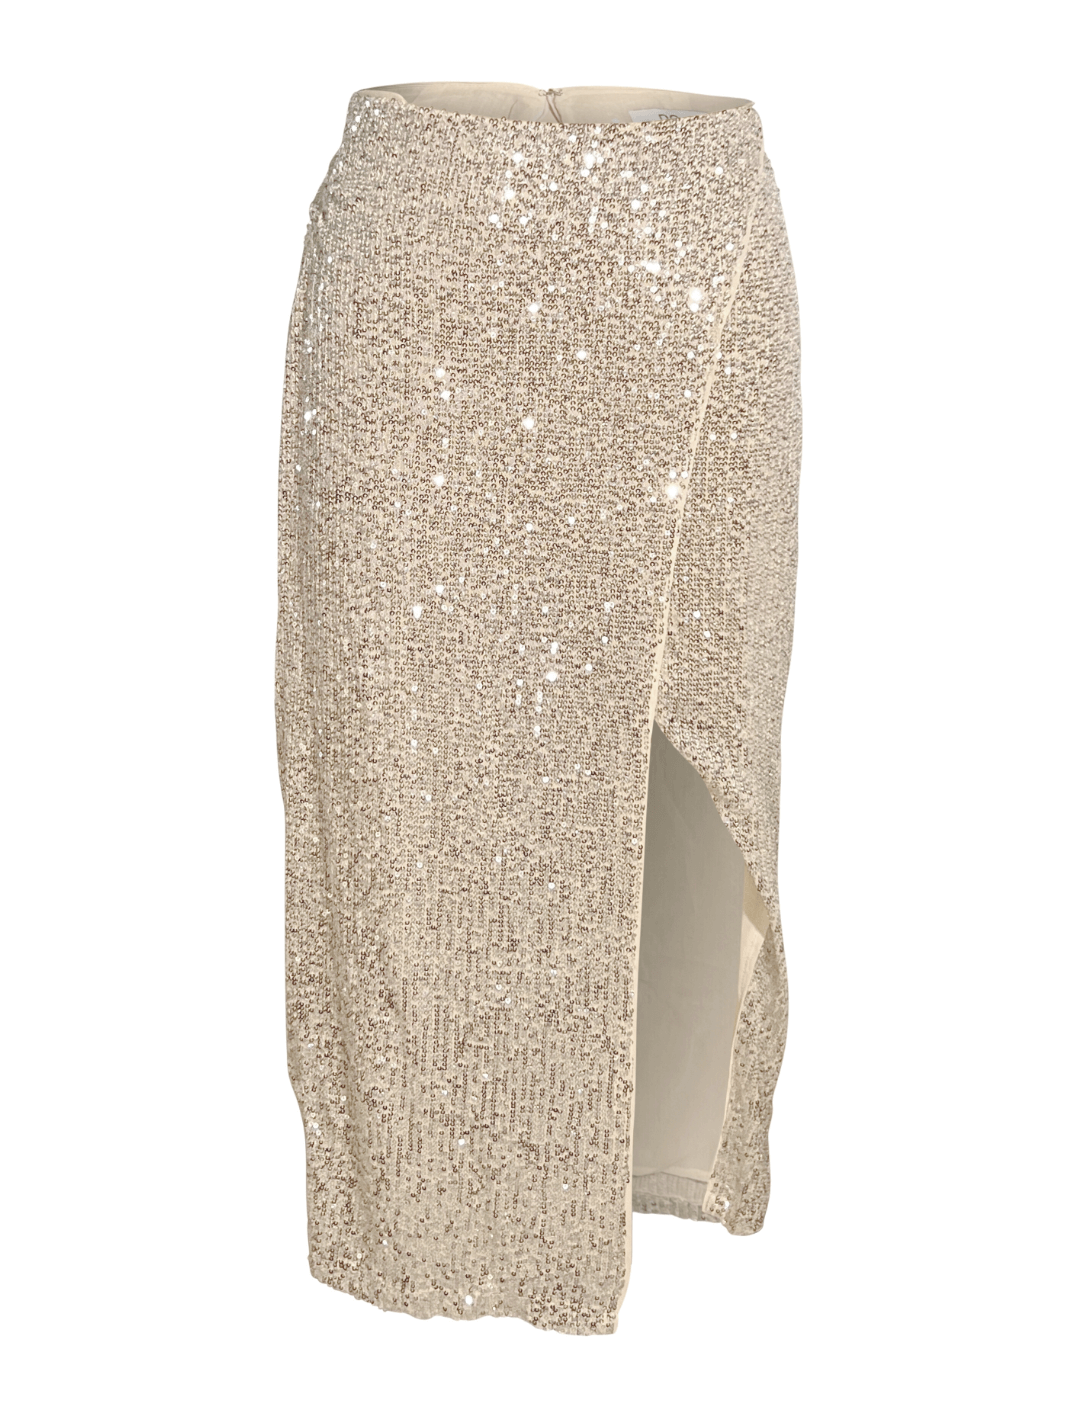 Sparkle Bright Gold Sequin Midi Skirt with Side Slit – Tiana Bay